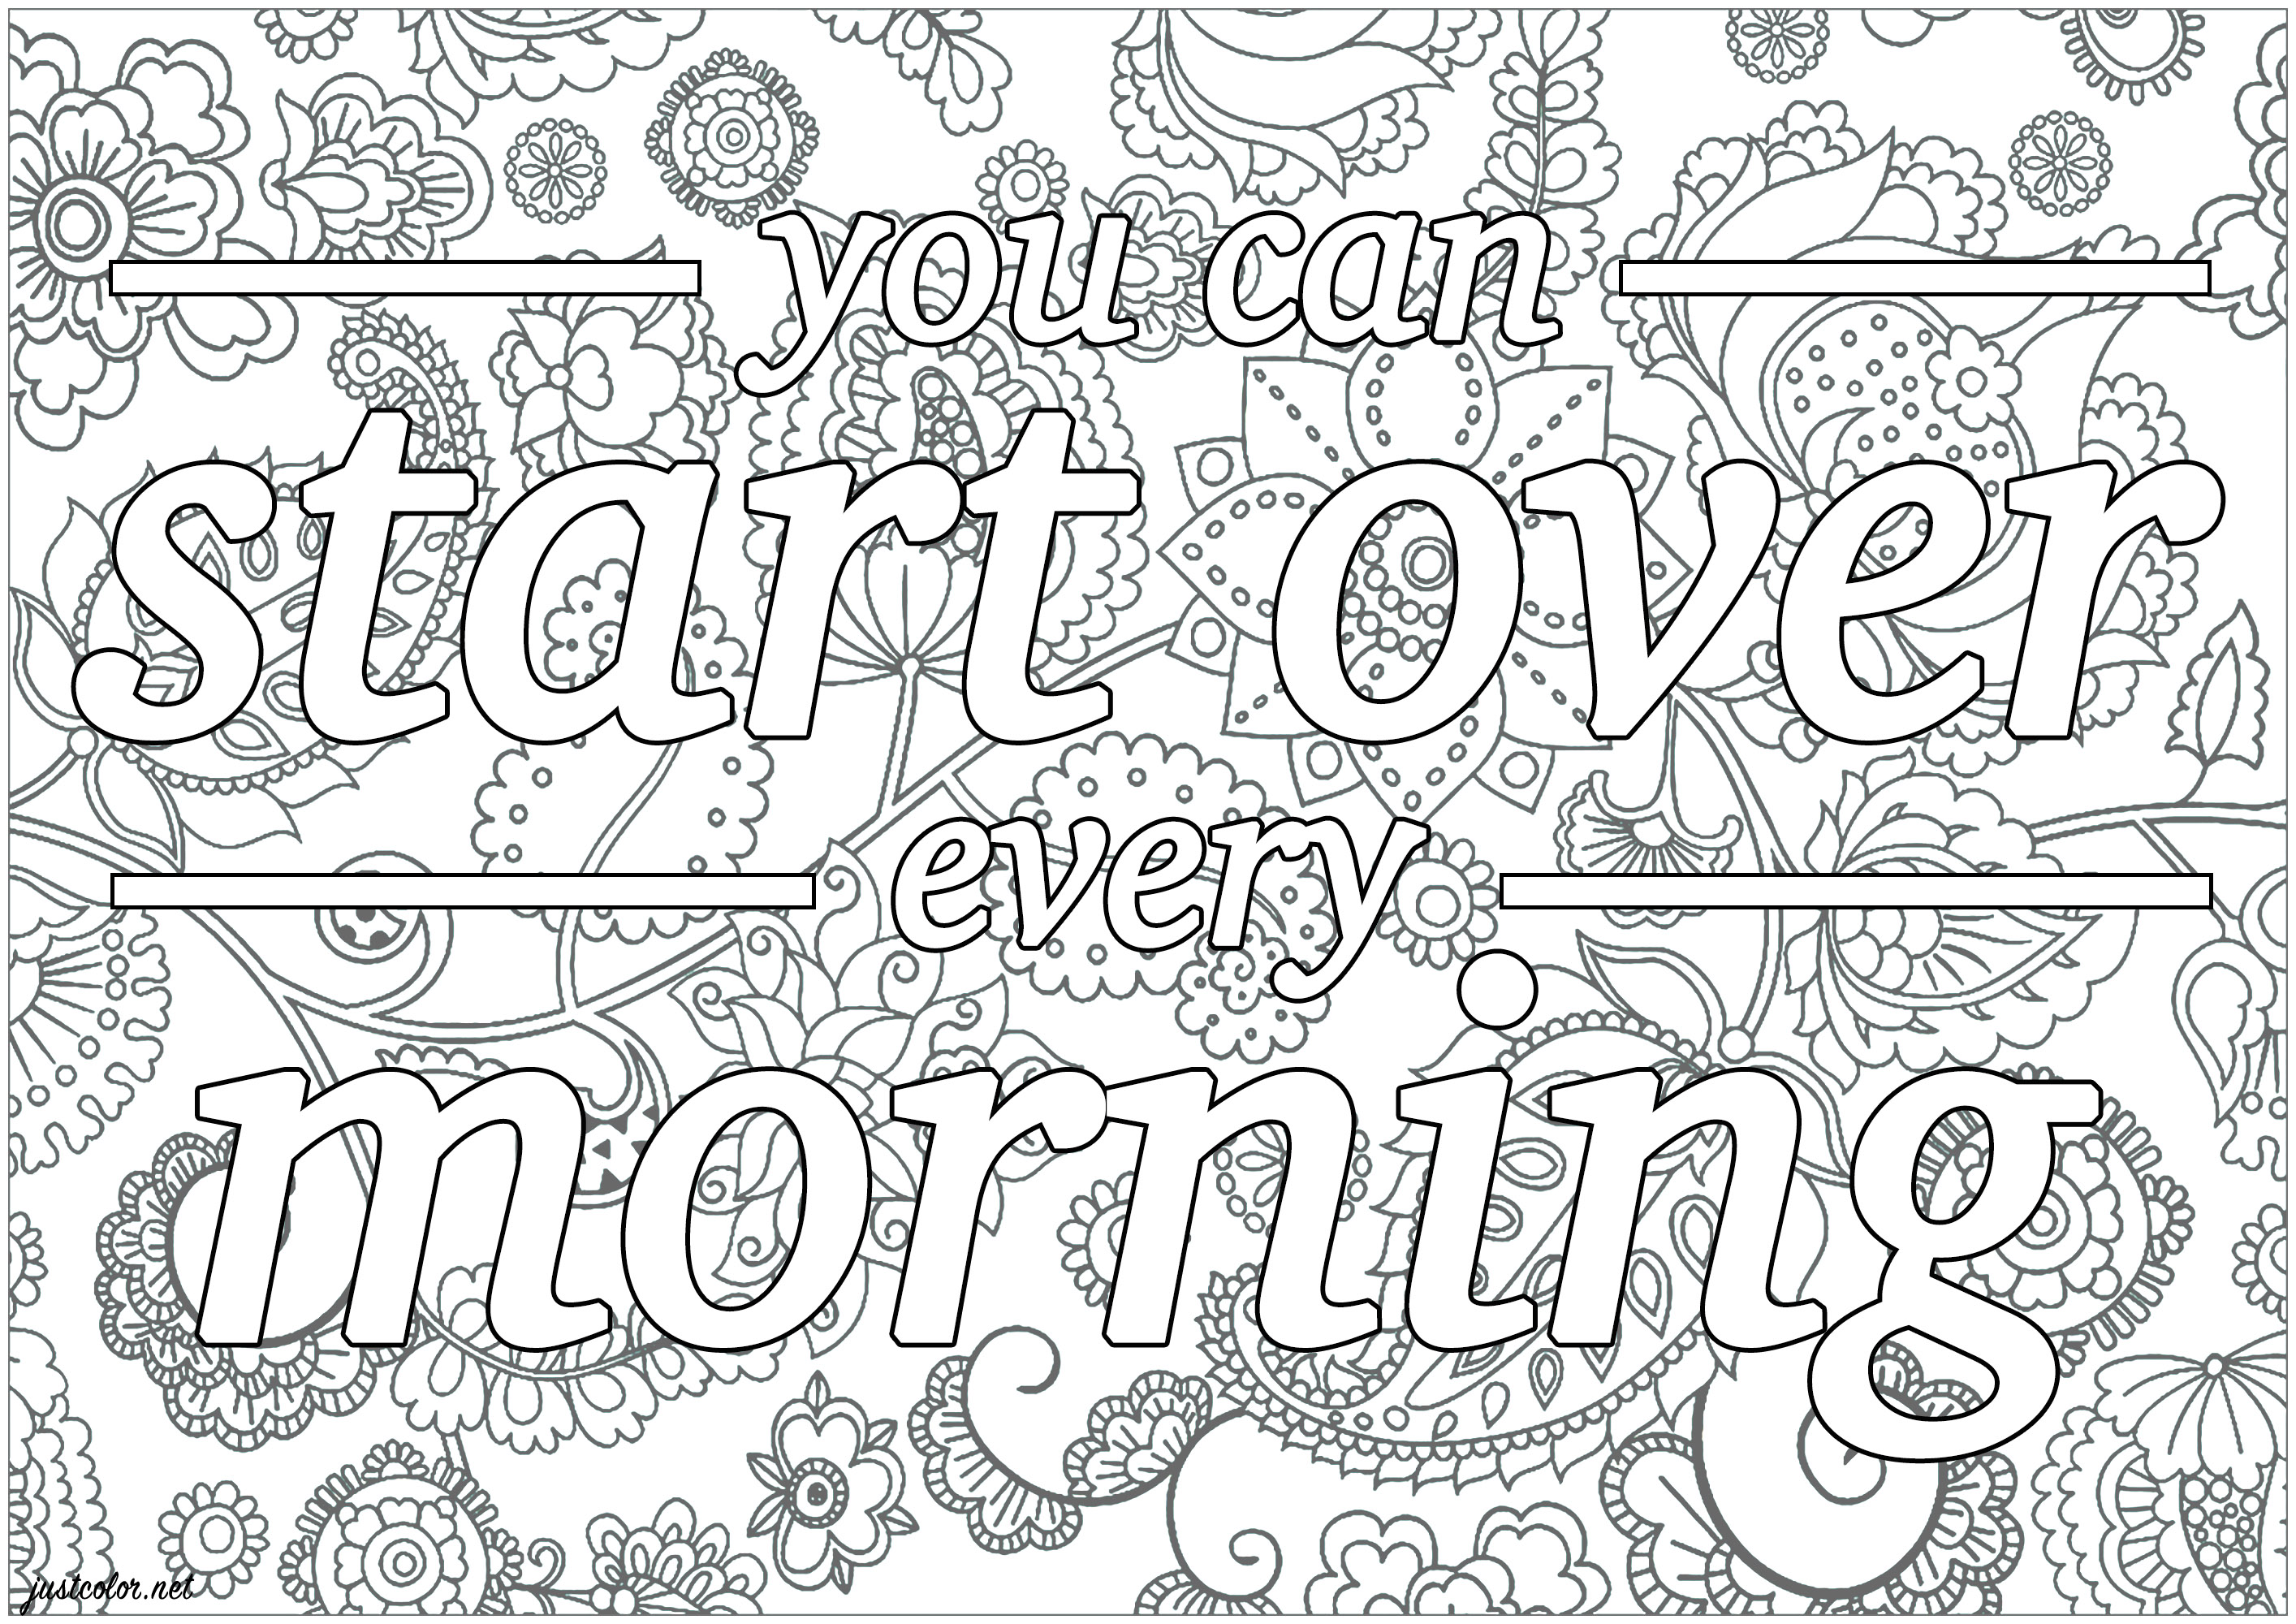 You can start over every morning - Positive & inspiring quotes ...